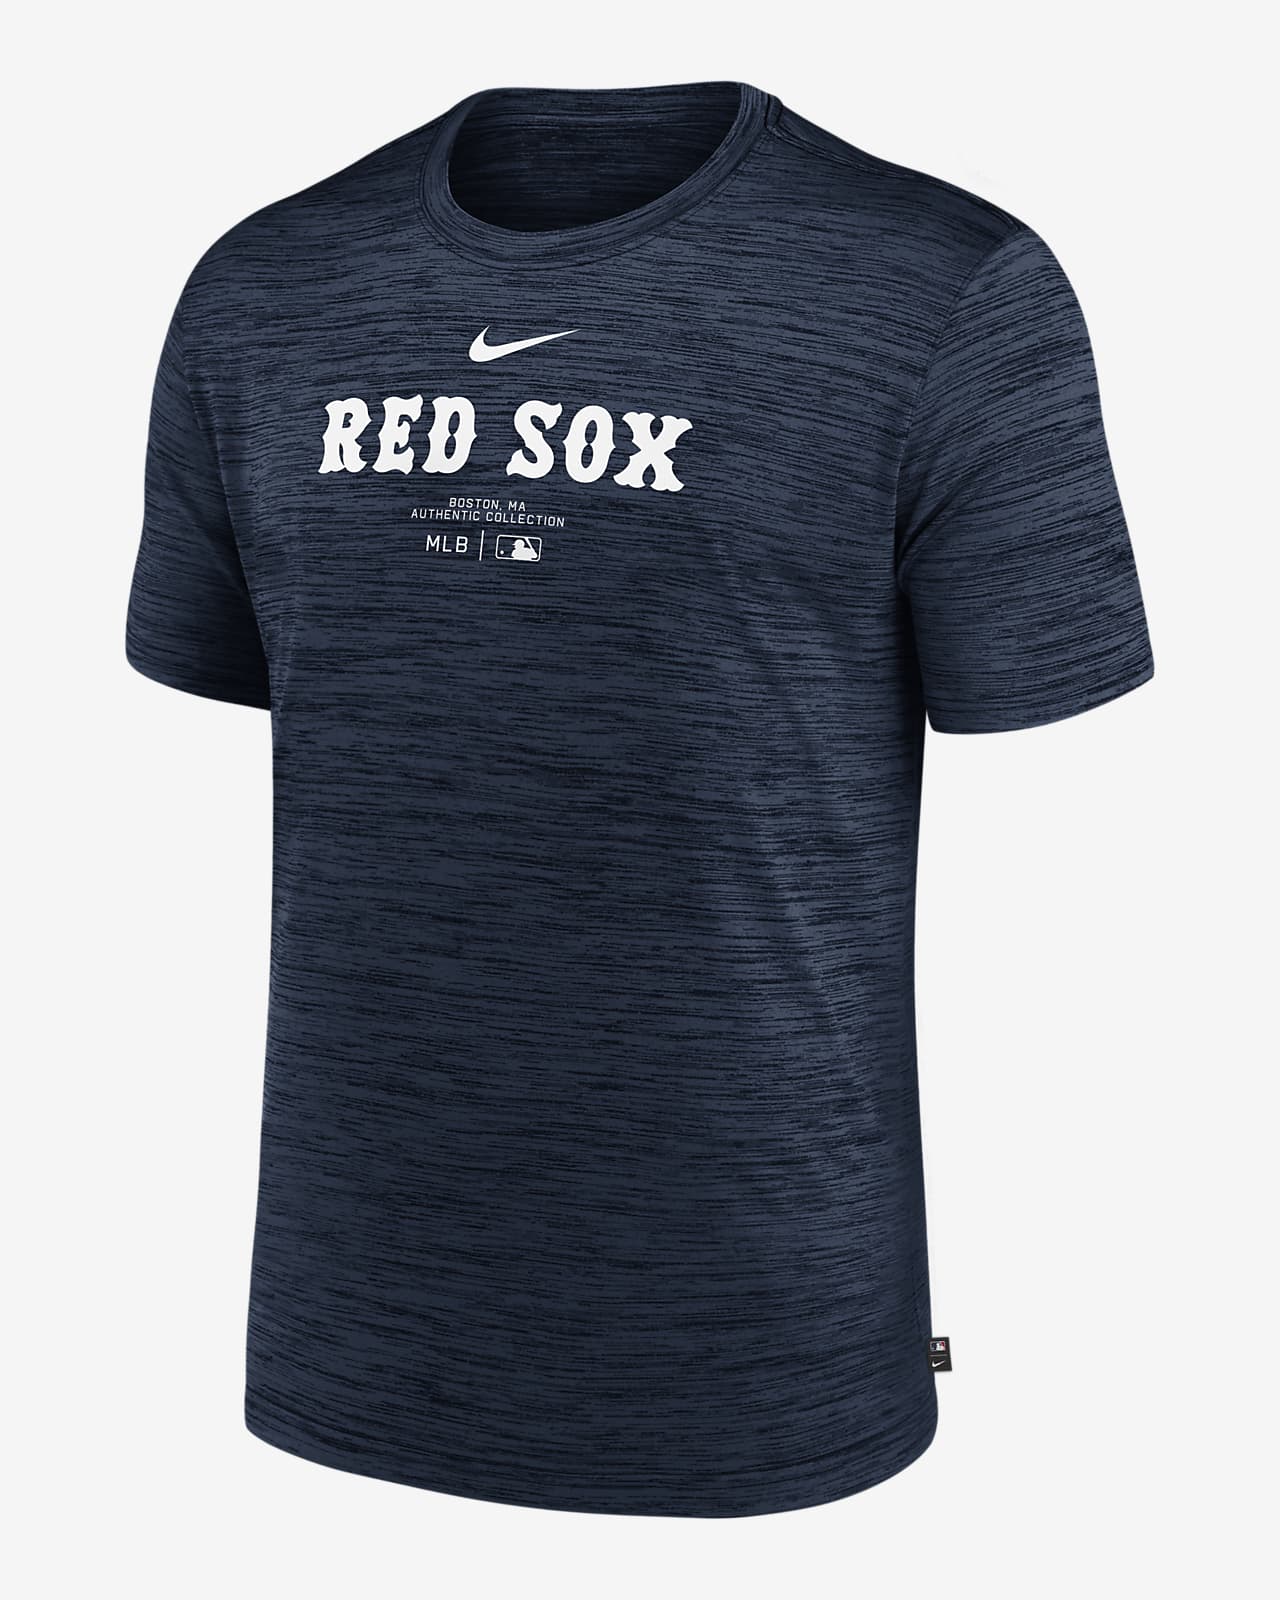 Boston Red Sox Authentic Collection Practice Velocity Men's Nike Dri-FIT MLB T-Shirt